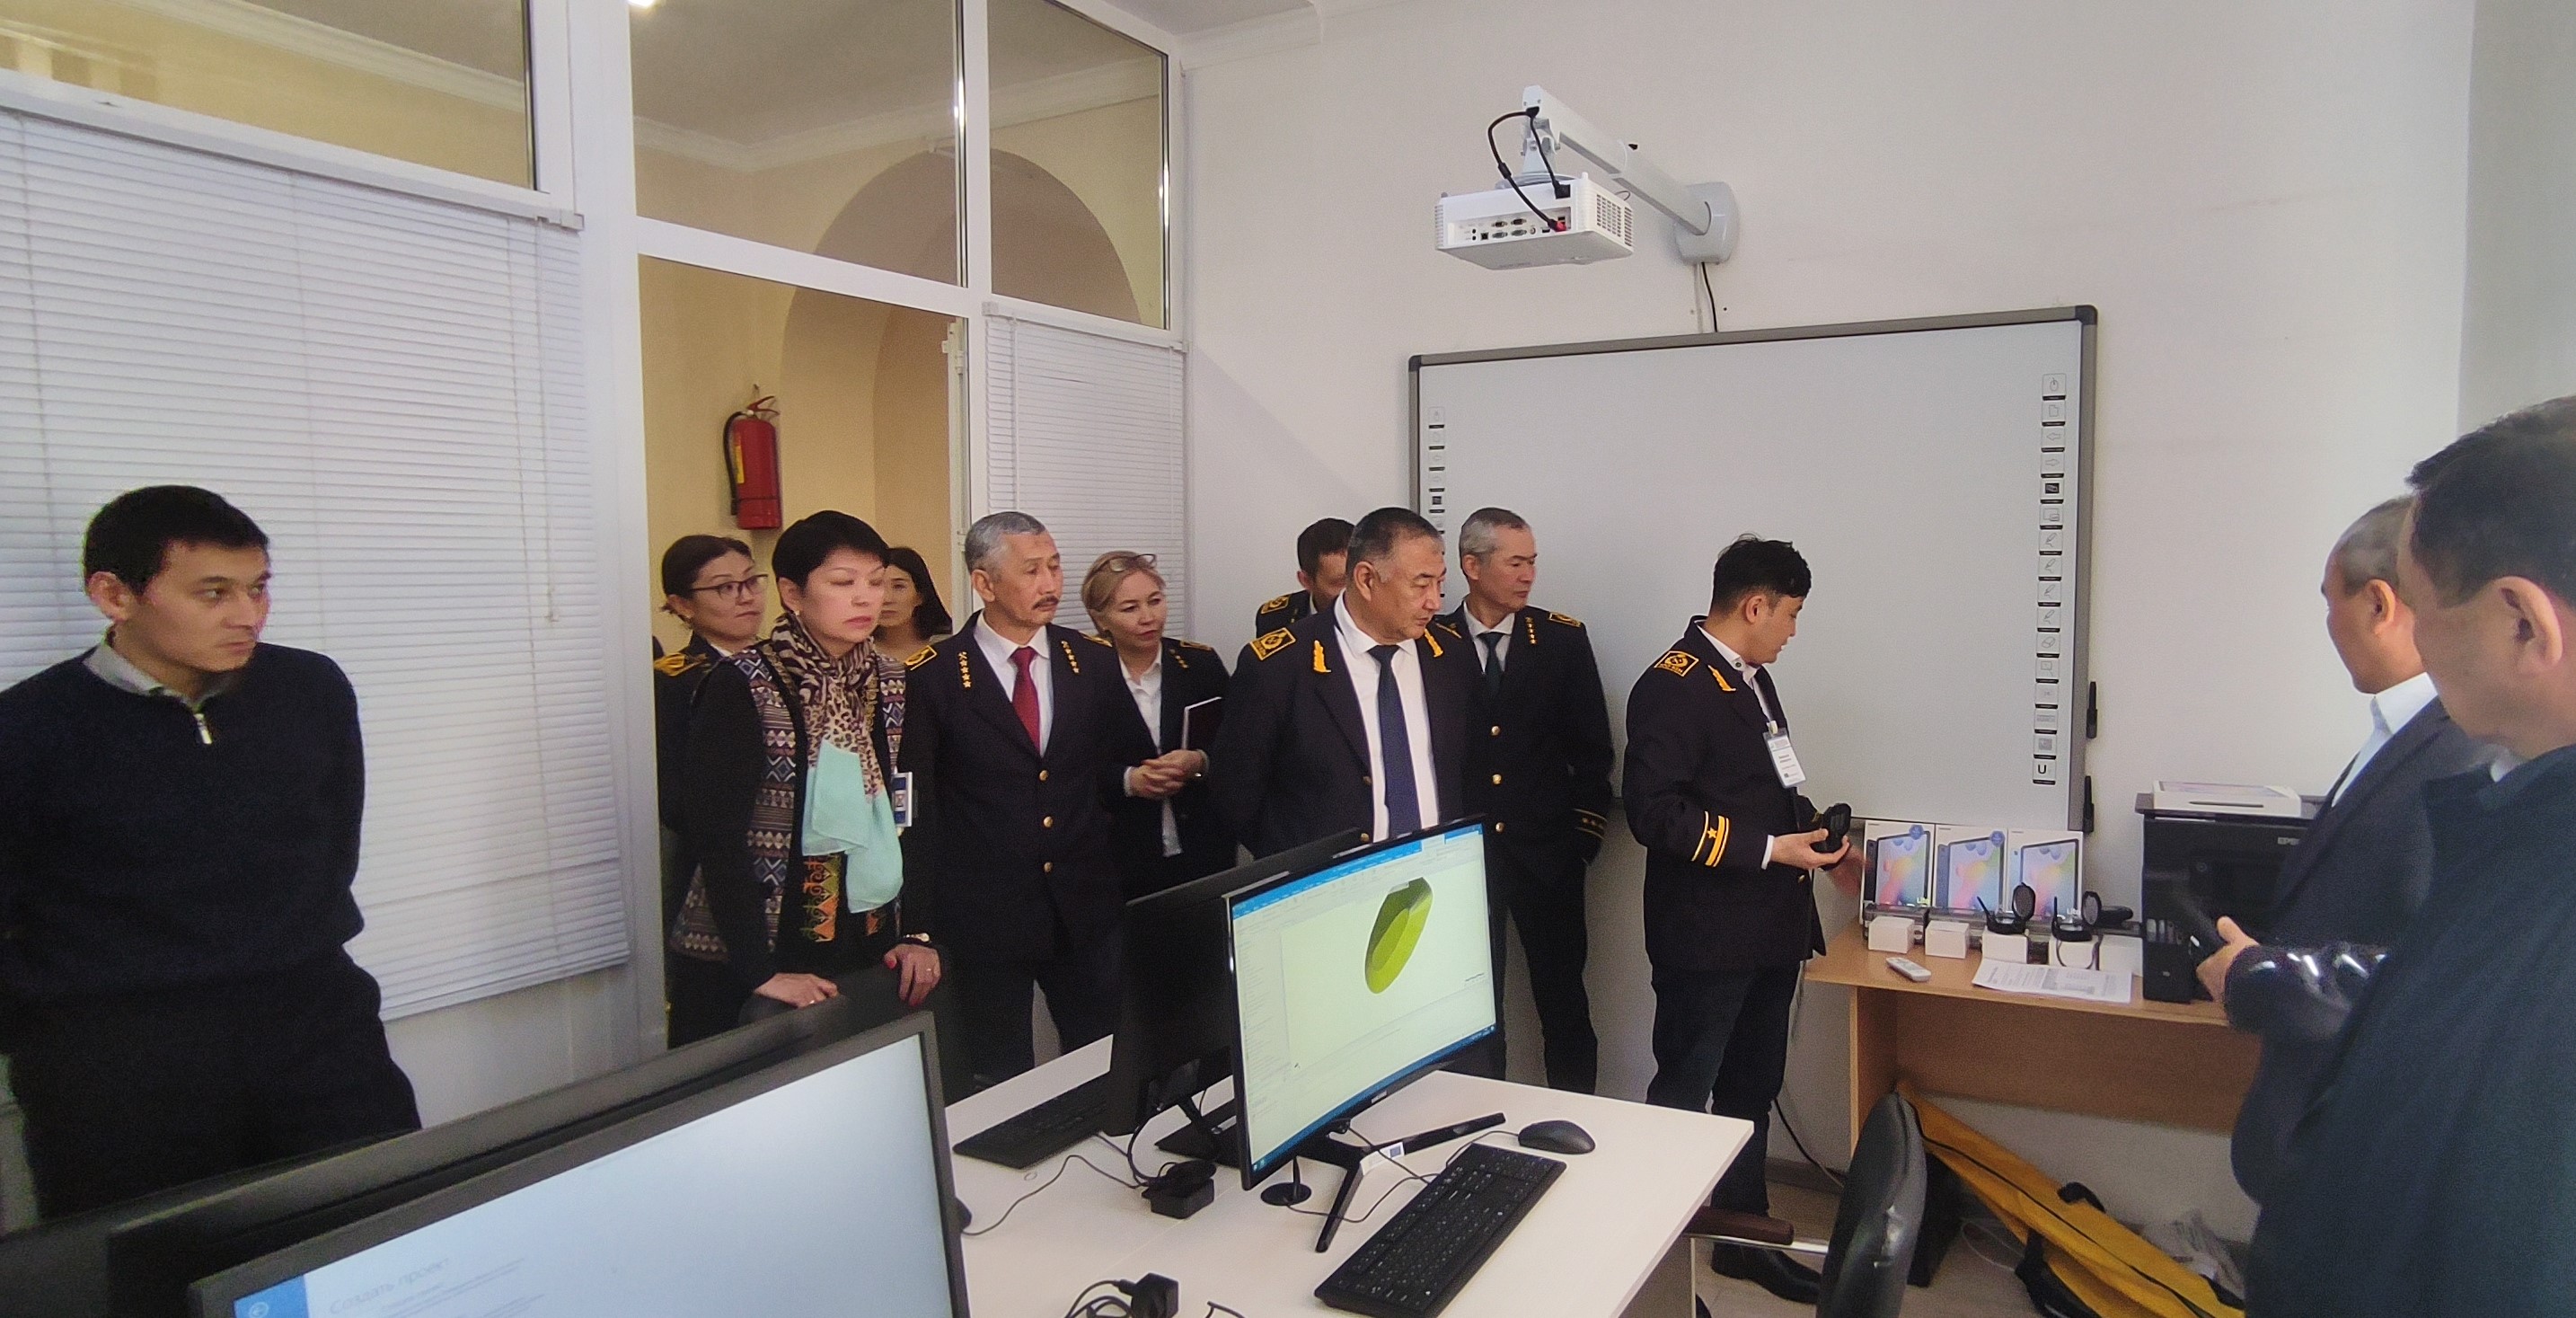 Opening of the Lab in GIT at the Kyrgyz State University of Geology, Mining and Natural Resources (KSMU)